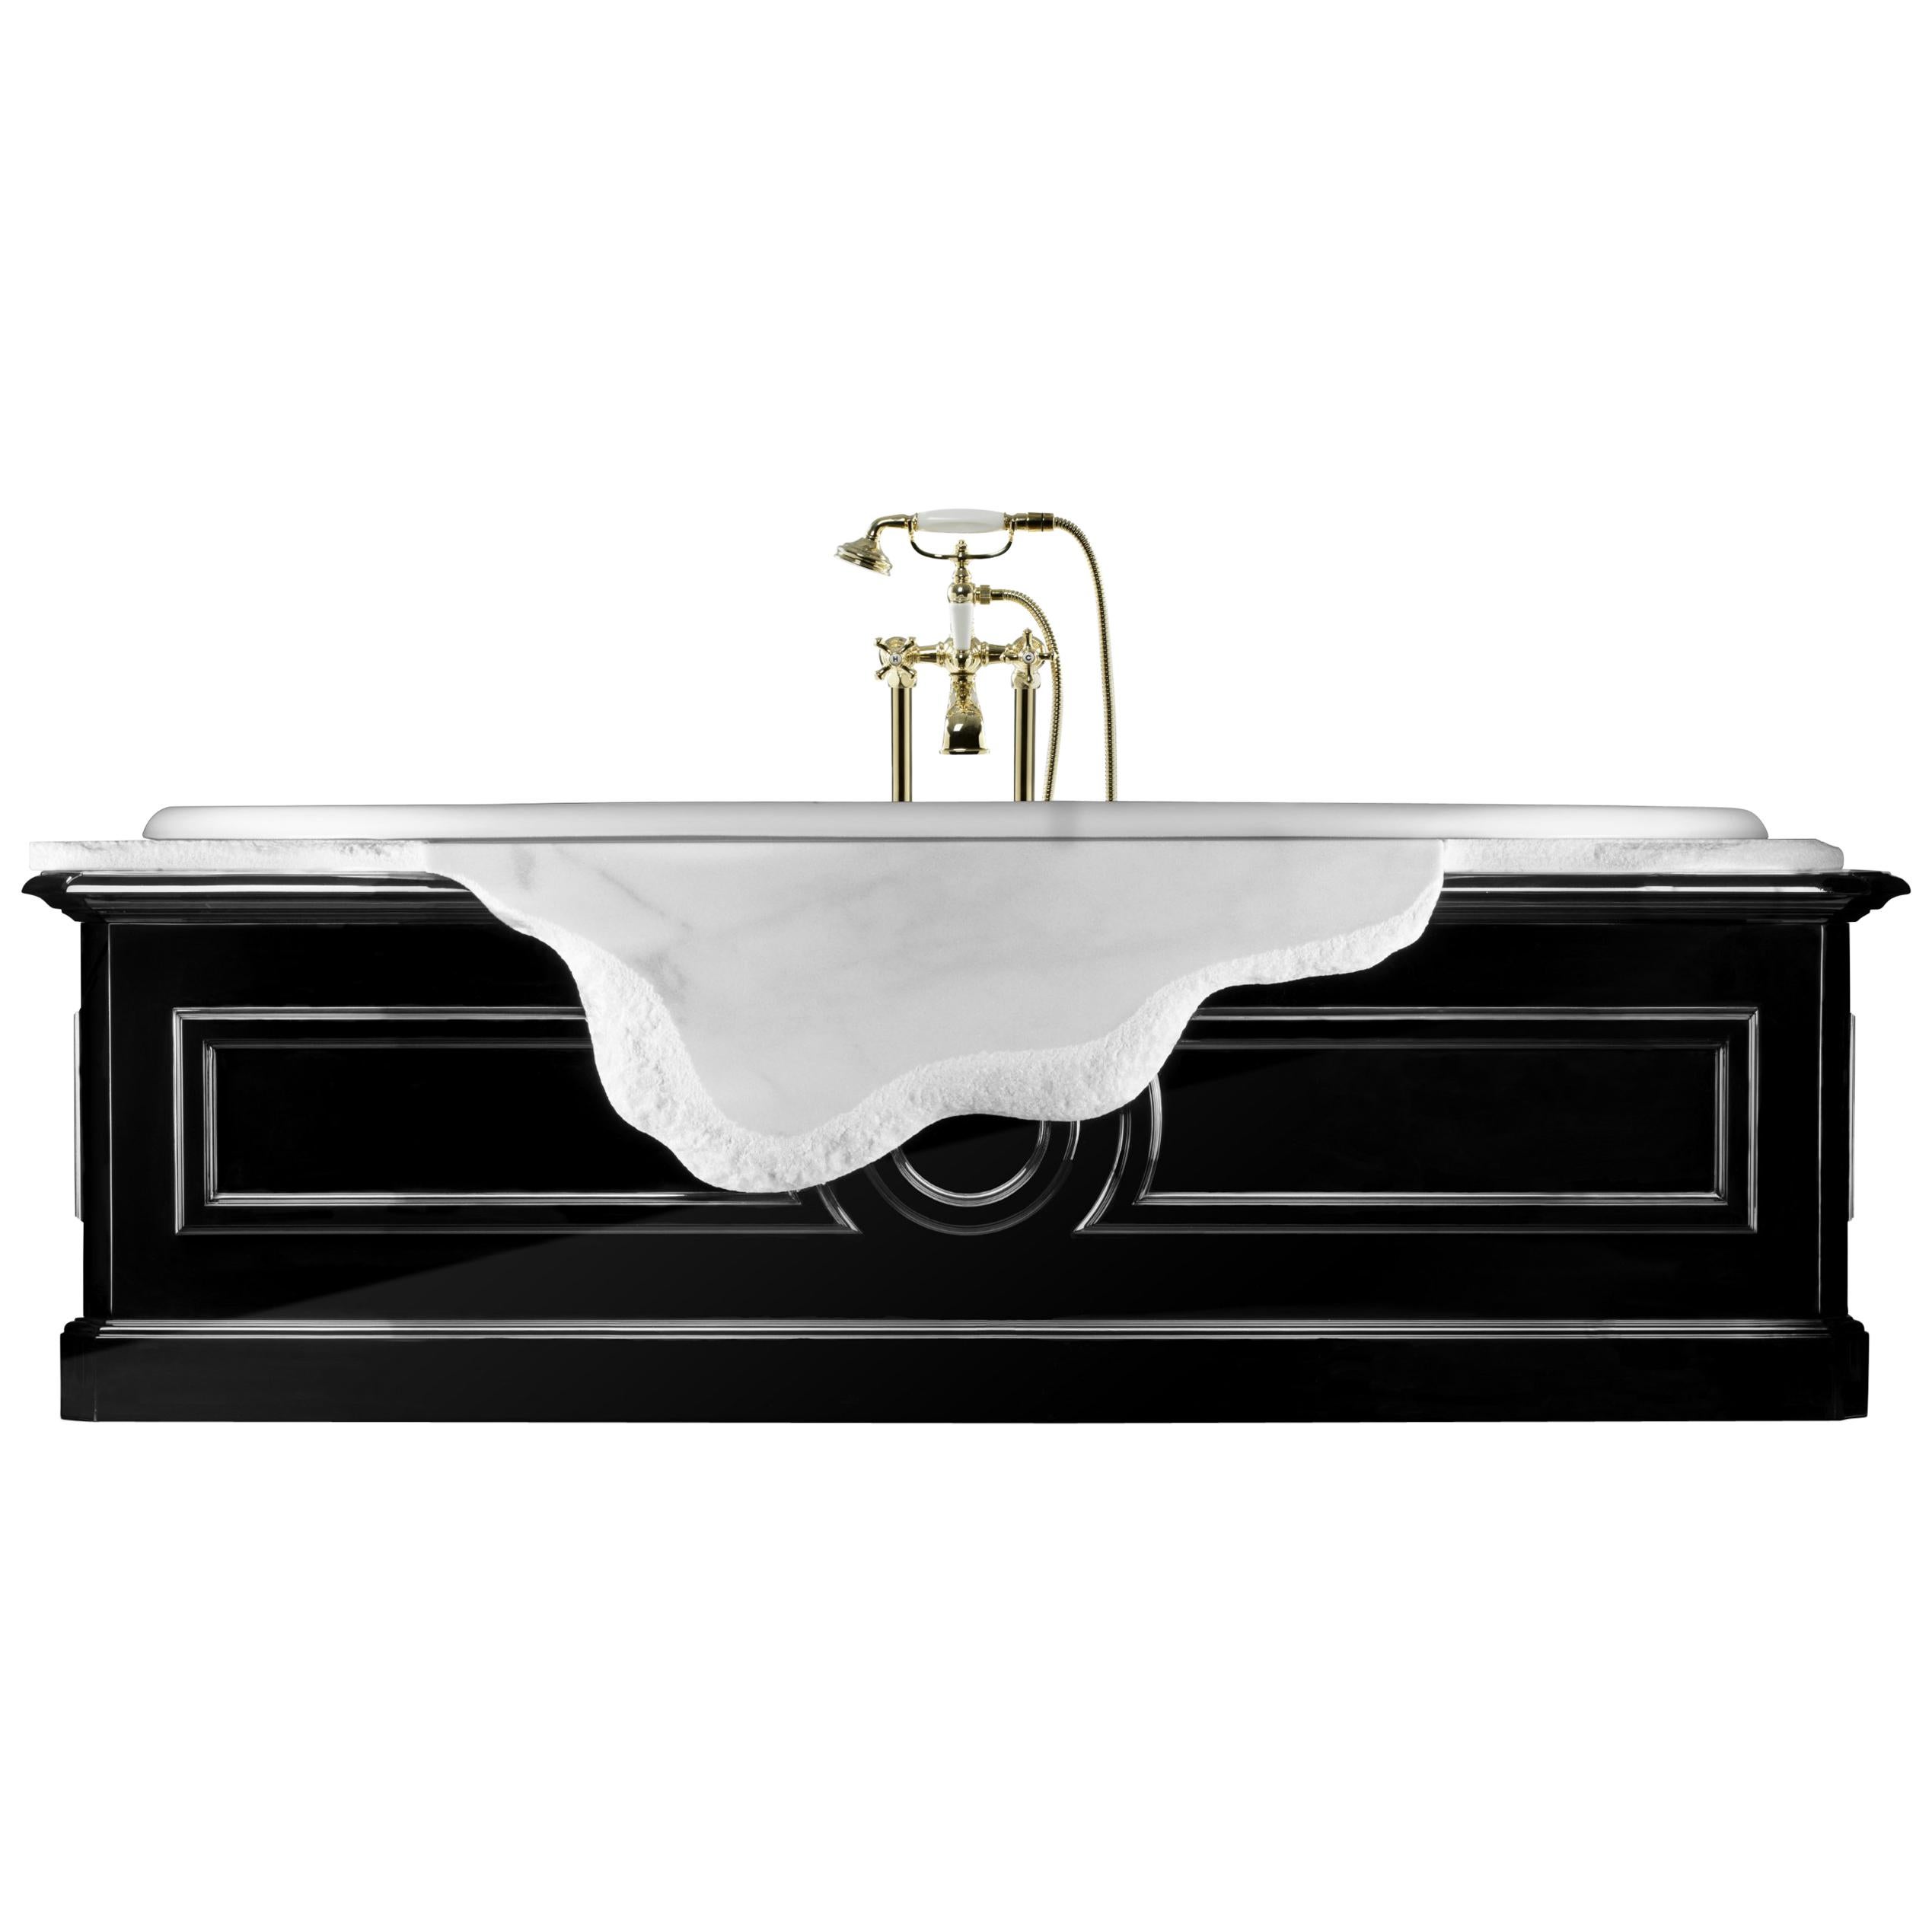 Petra Bathtub in White Marble with Black Lacquer Details For Sale